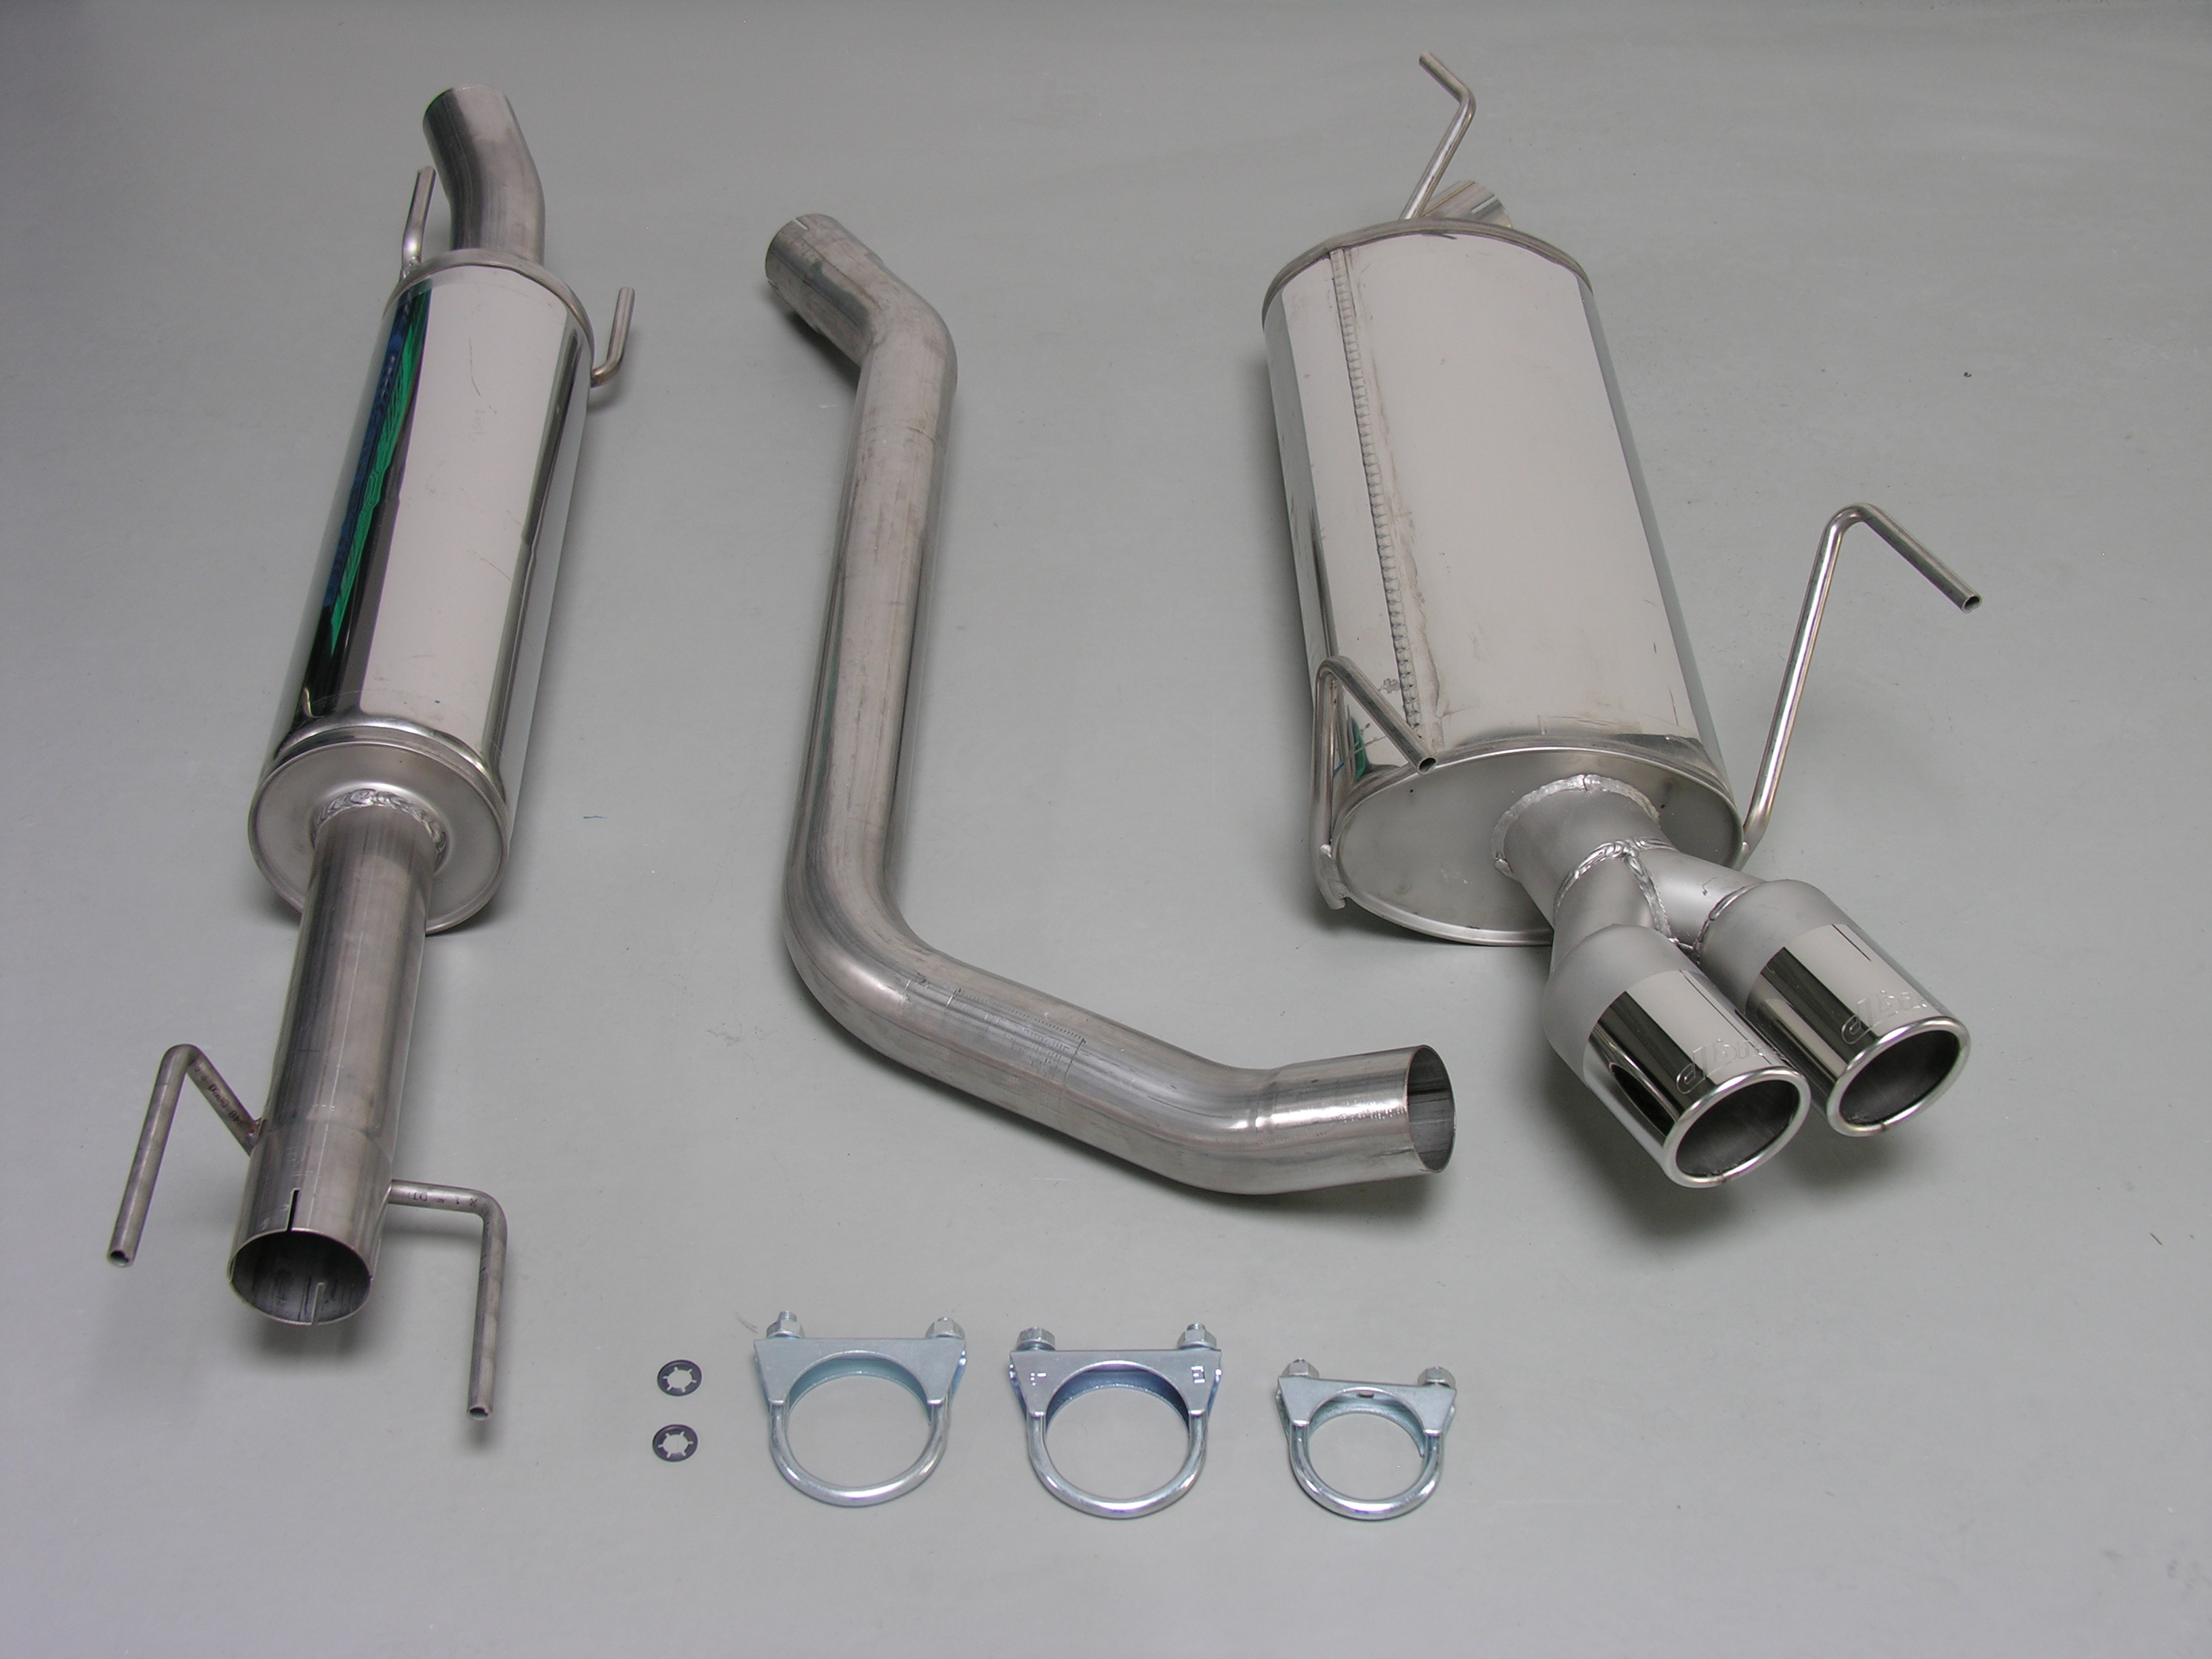 Stainless Steel - Exhaust systems for Opel / Vauxhall  Vectra B fro al  4 Cyl. engines  Tail pipe design 2x80mm